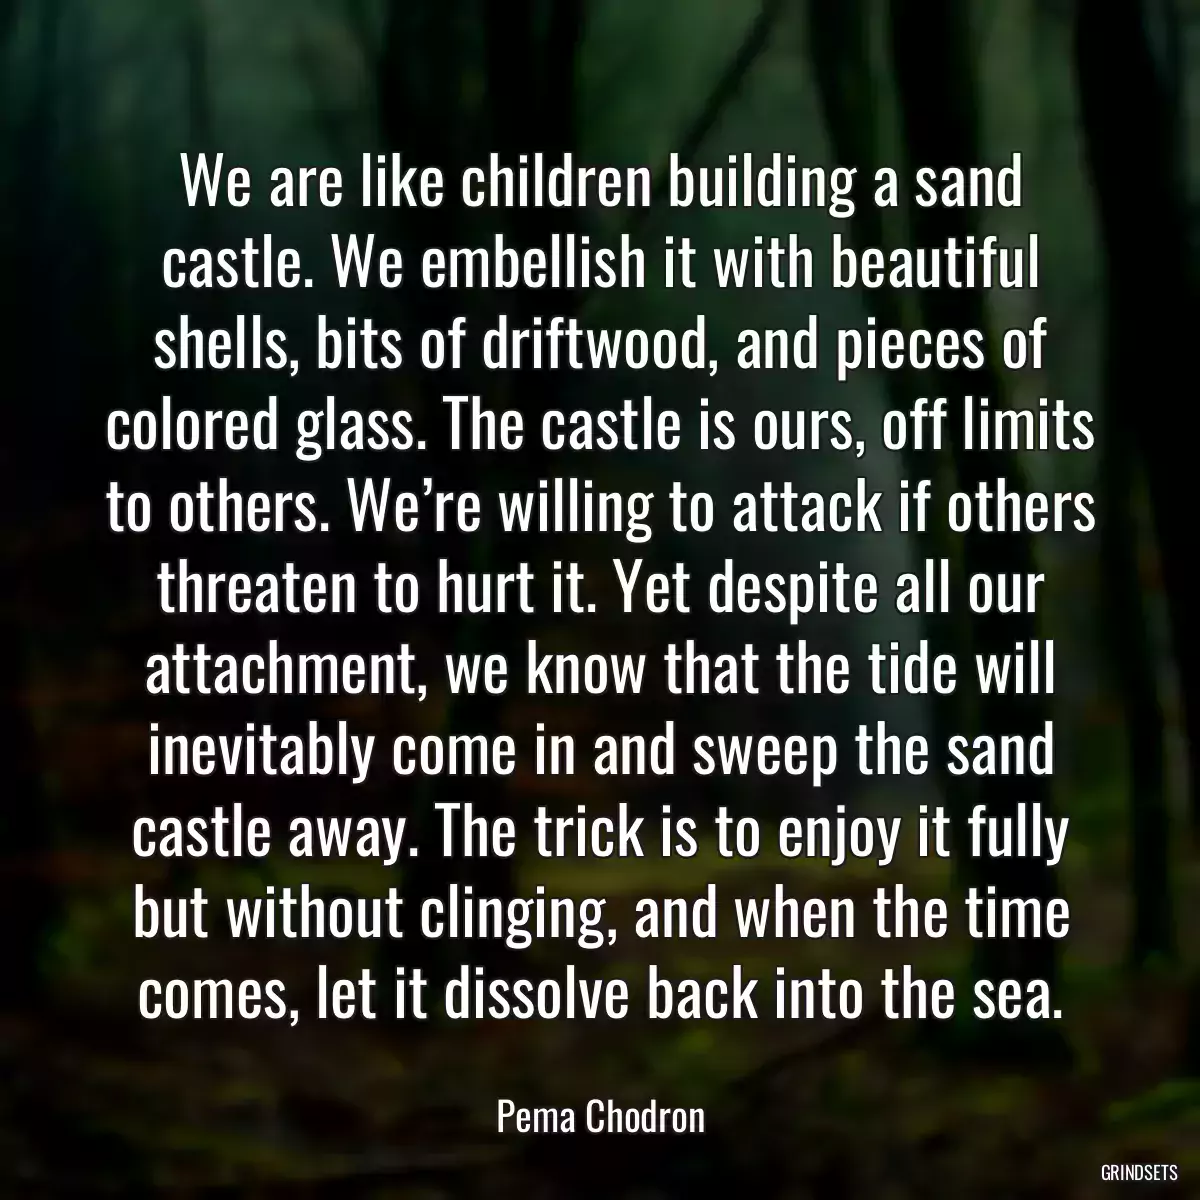 We are like children building a sand castle. We embellish it with beautiful shells, bits of driftwood, and pieces of colored glass. The castle is ours, off limits to others. We’re willing to attack if others threaten to hurt it. Yet despite all our attachment, we know that the tide will inevitably come in and sweep the sand castle away. The trick is to enjoy it fully but without clinging, and when the time comes, let it dissolve back into the sea.